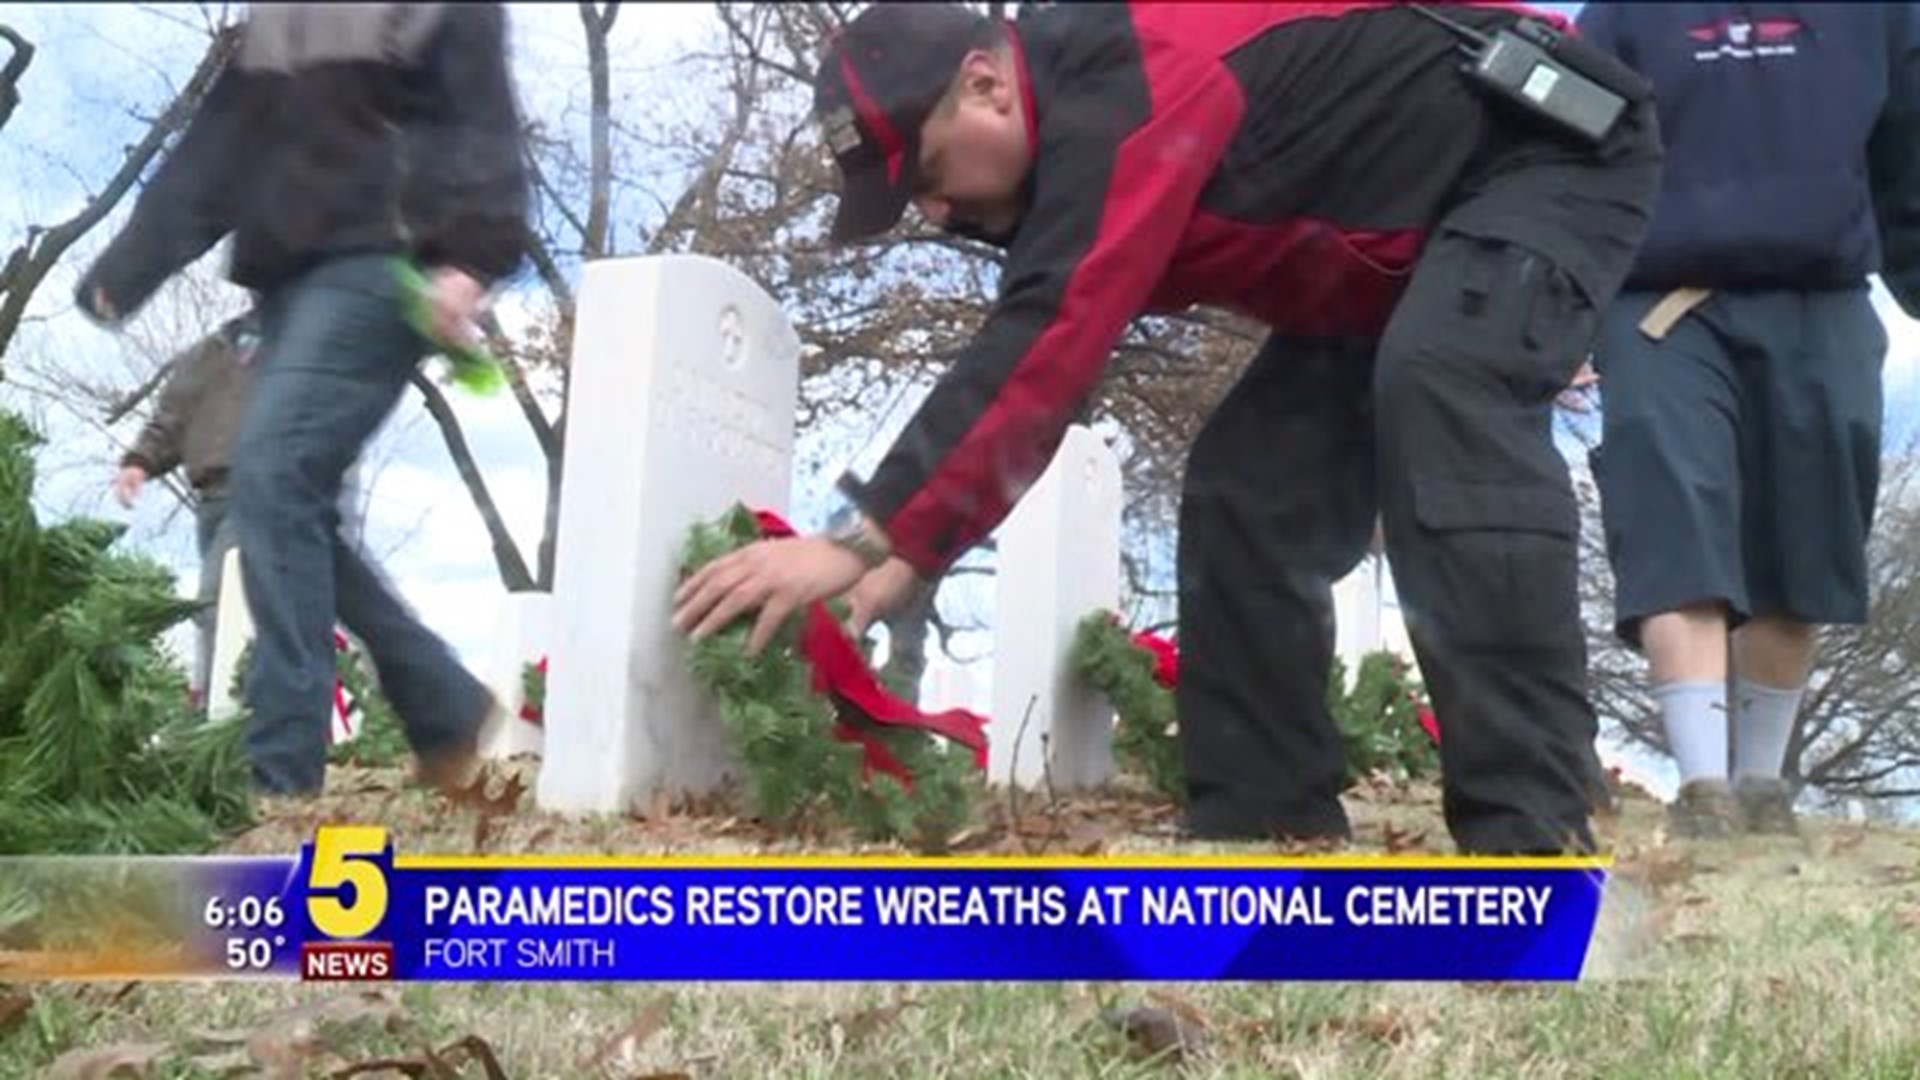 Paramedics Restore Wreaths At National Cemetery